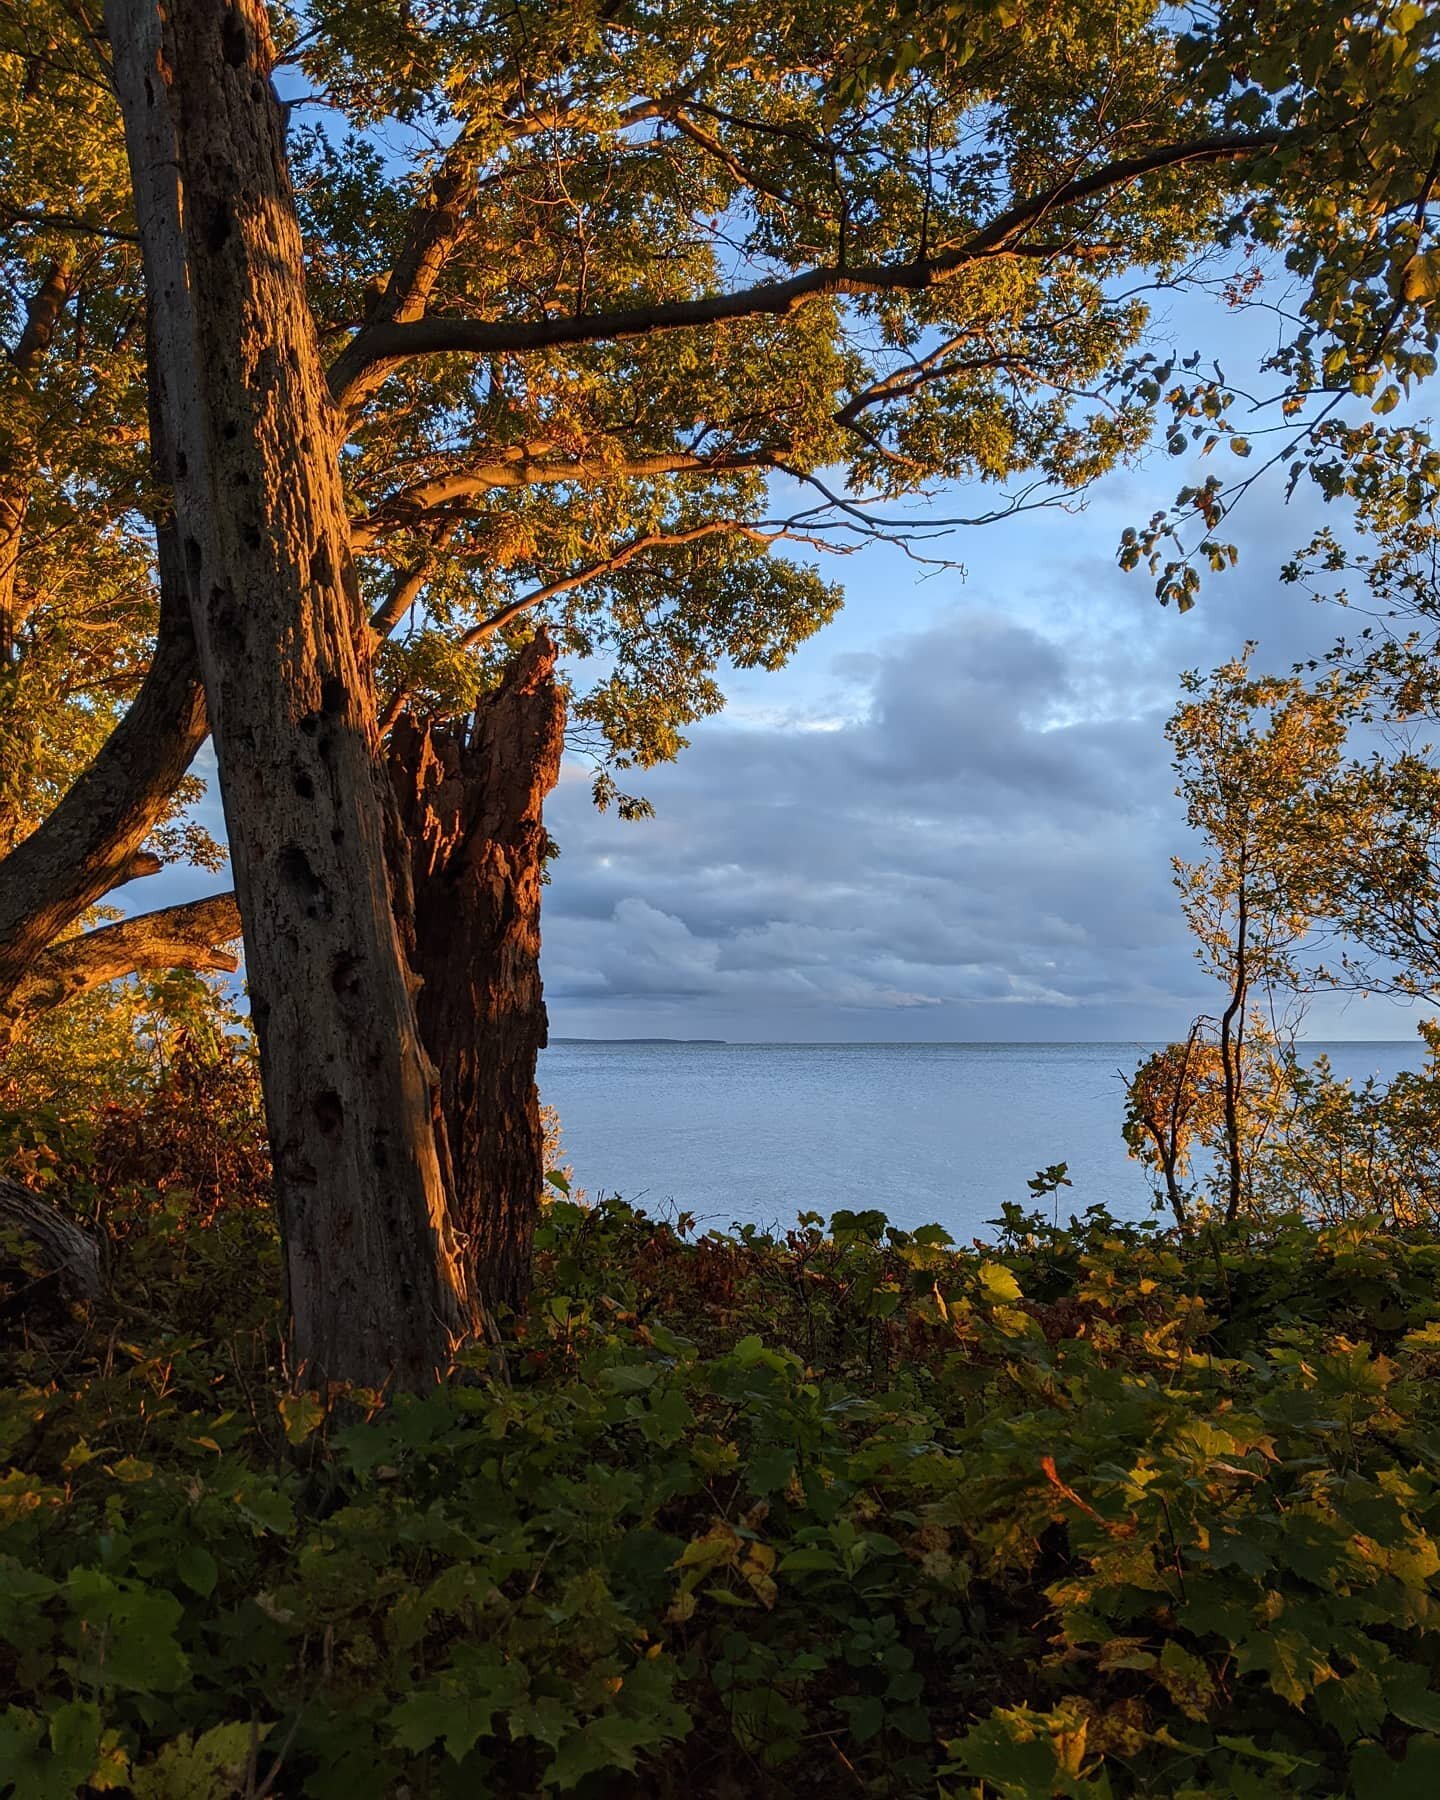 Typically I edit my photos but mother nature did all the work for me on this one.
#noeditsneeded #natureaddict #naturephotography #doorcounty #wisconsinoutdoors